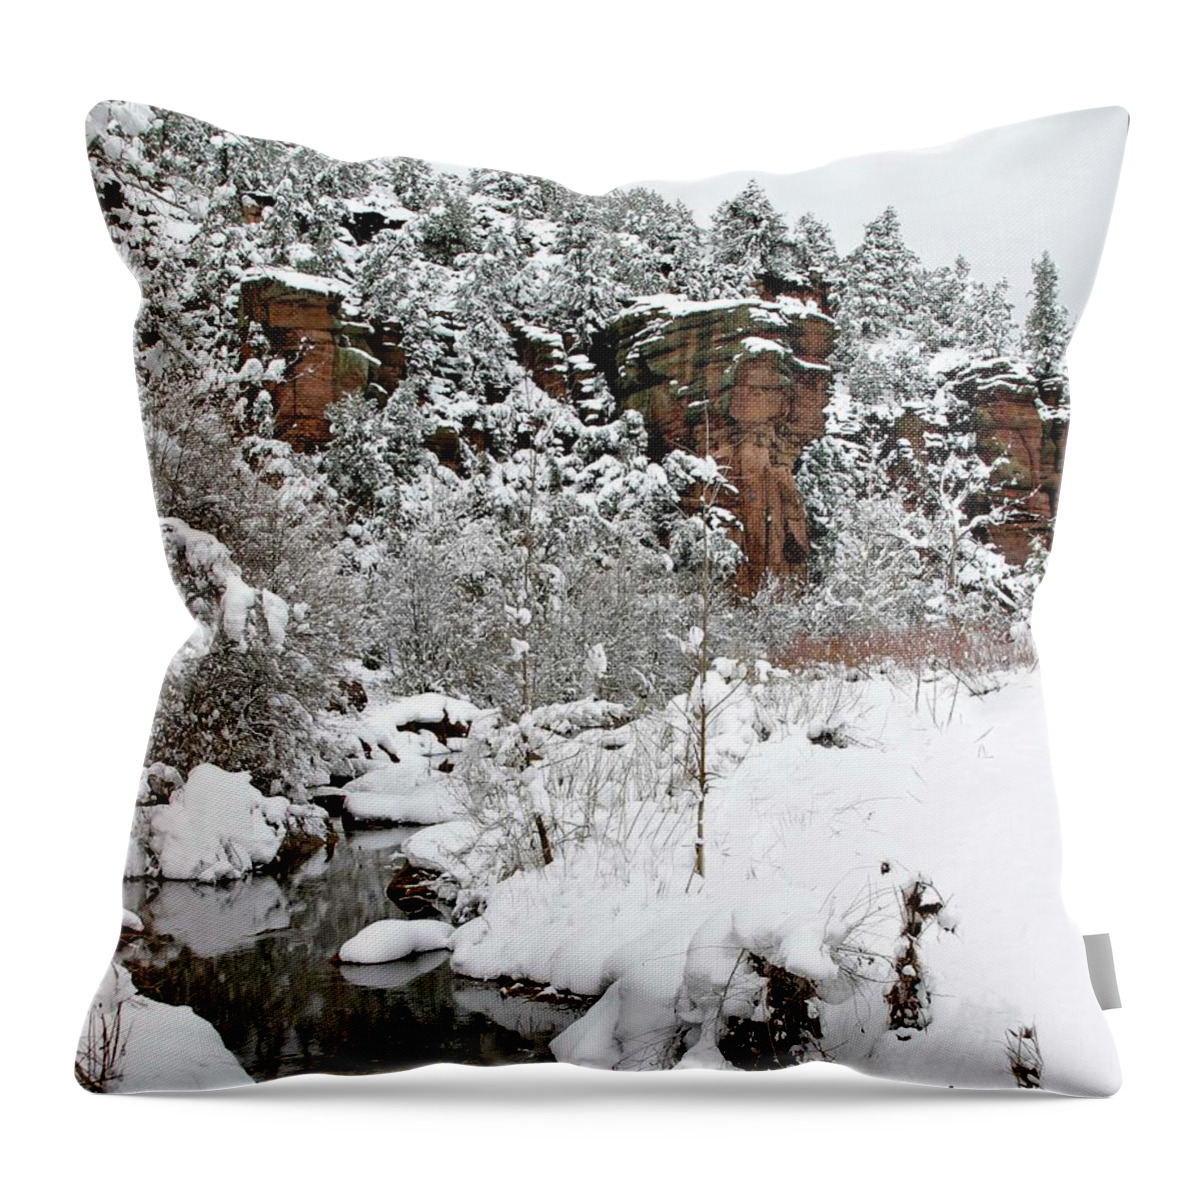 Snow Throw Pillow featuring the photograph East Verde Winter Crossing by Matalyn Gardner